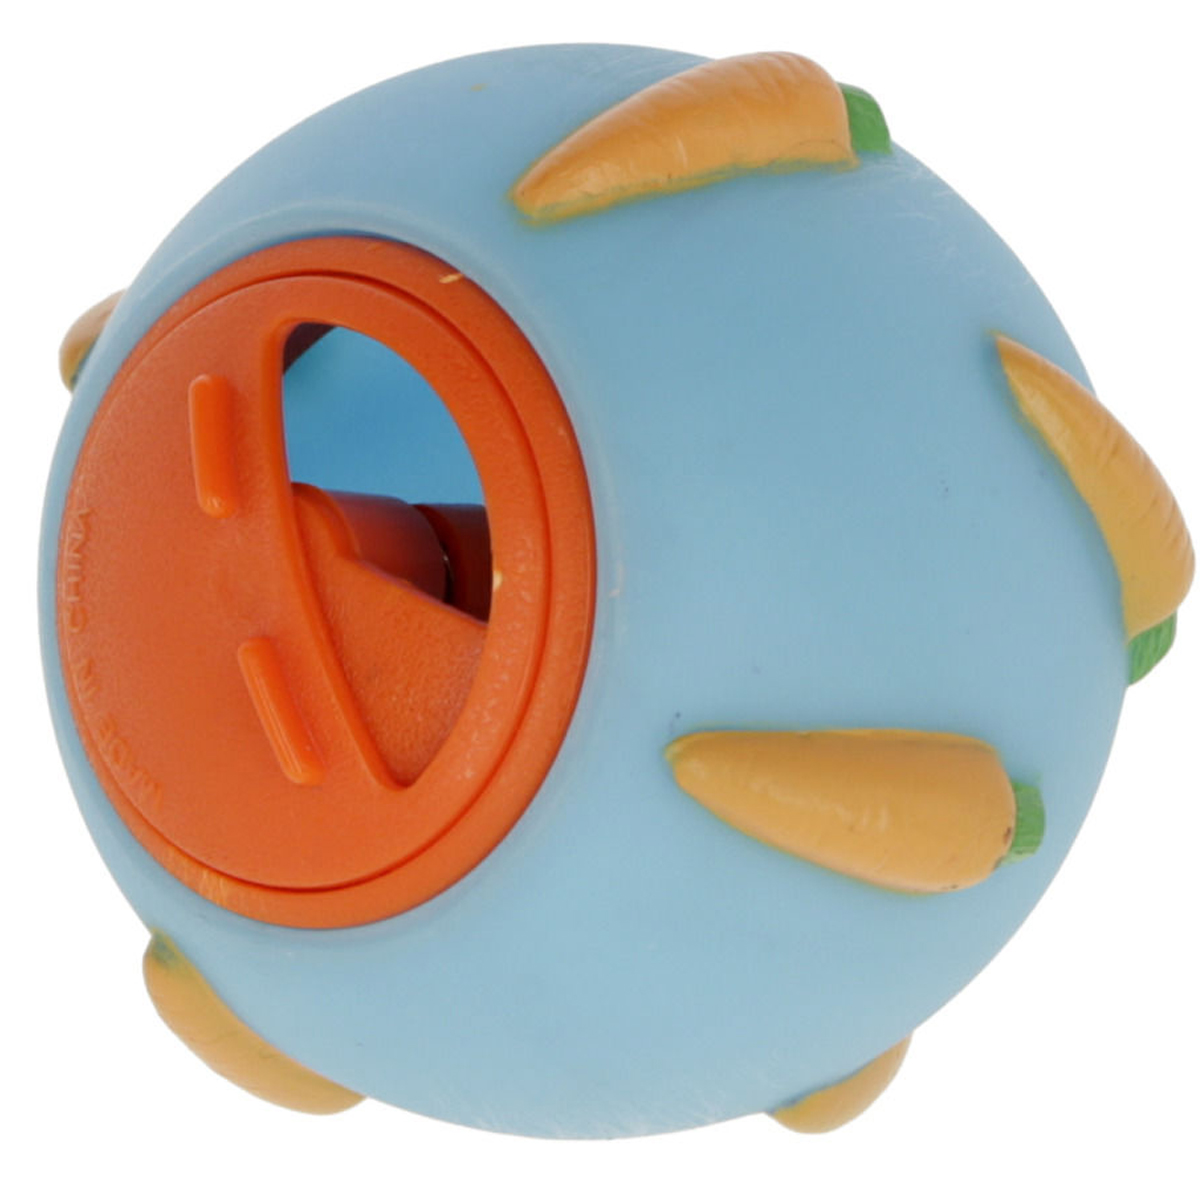 Kerbl snack ball for rabbits